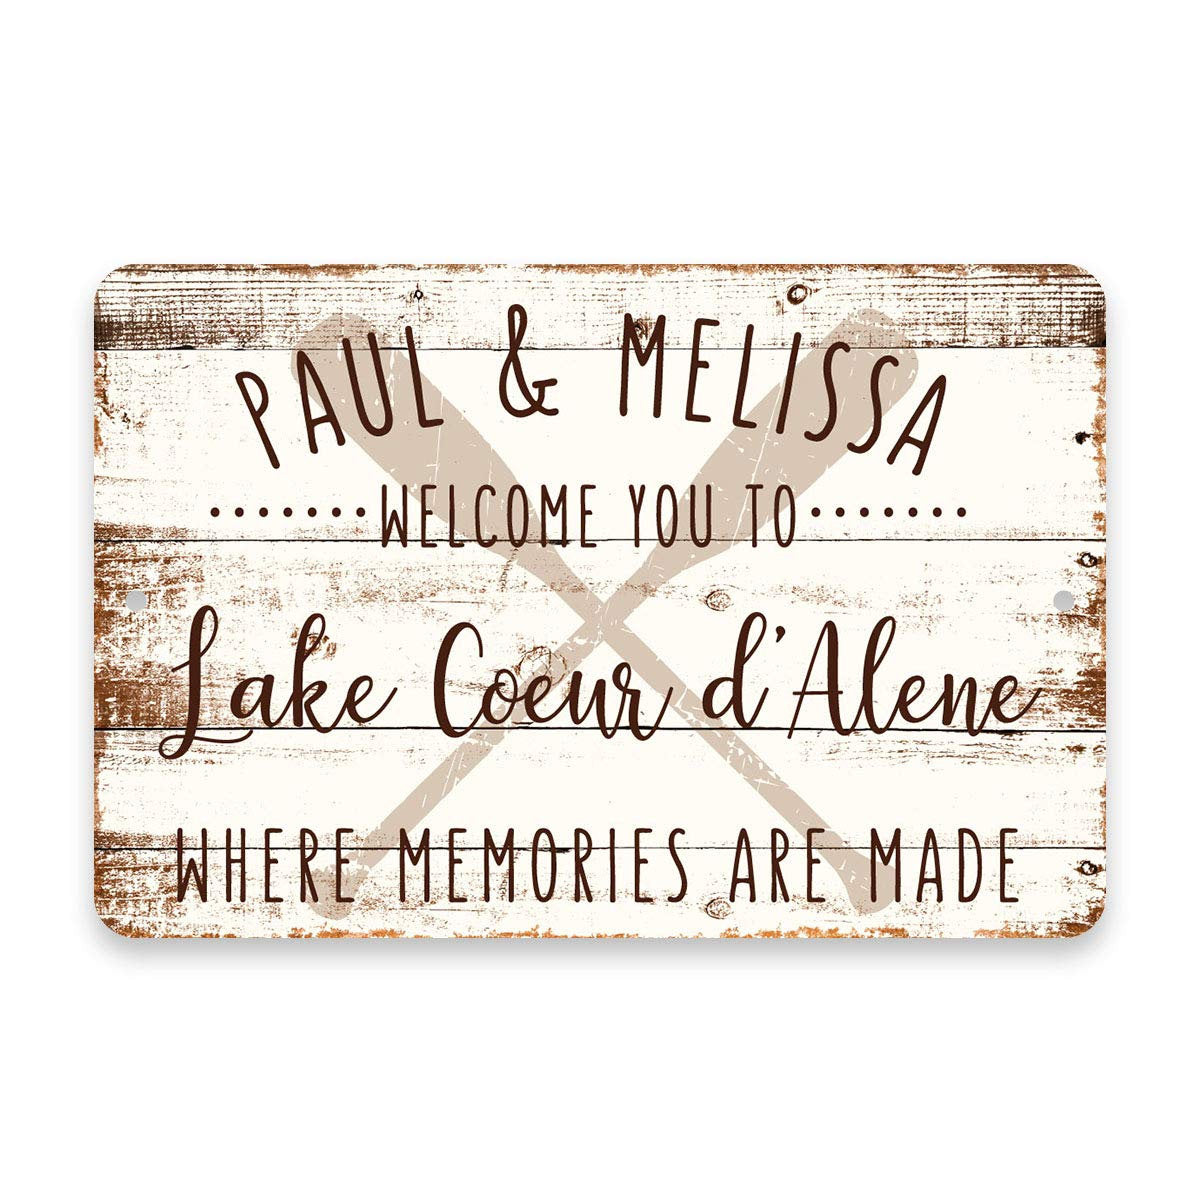 Personalized Welcome to Lake Coeur d'Alene Where Memories are Made Sign - 8 X 12 Metal Sign with Wood Look